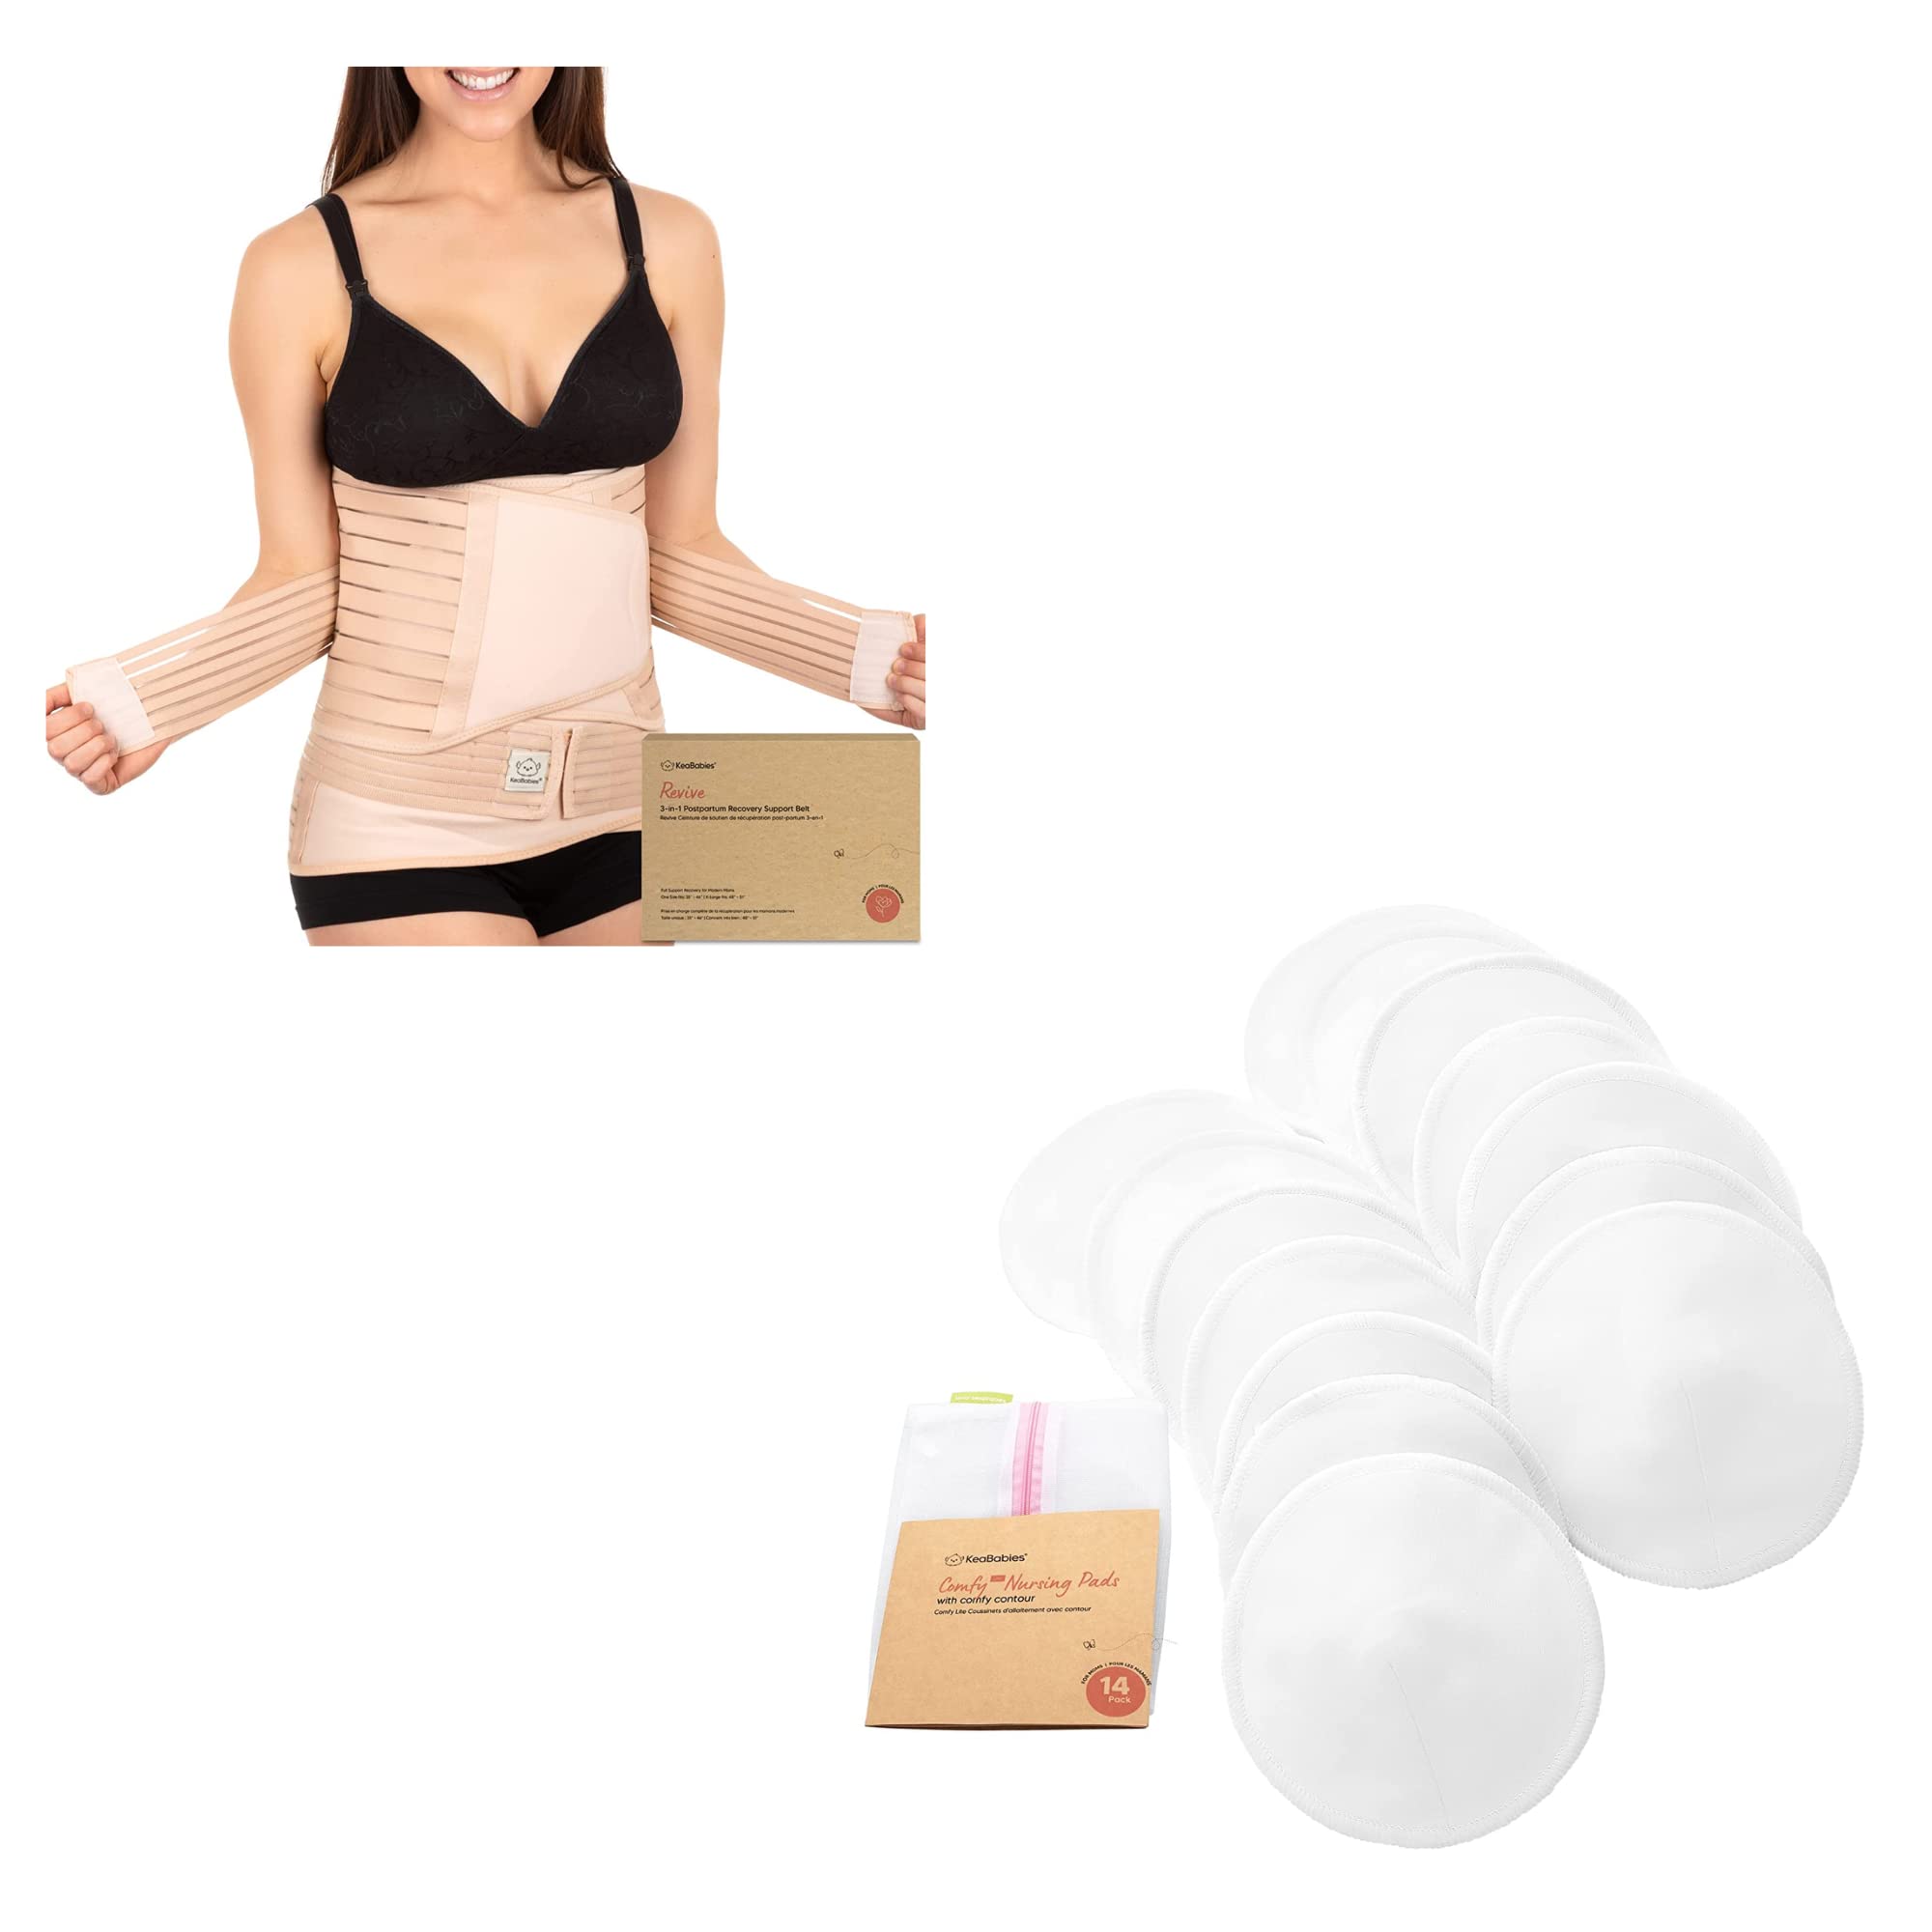 KeaBabies 3 in 1 Postpartum Belly Support Recovery Wrap and Organic Bamboo 3-Layers Nursing Breast Pads - Postpartum Belly Band - 14 Washable Pads + Wash Bag - After Birth Brace - Breastfeeding Pad